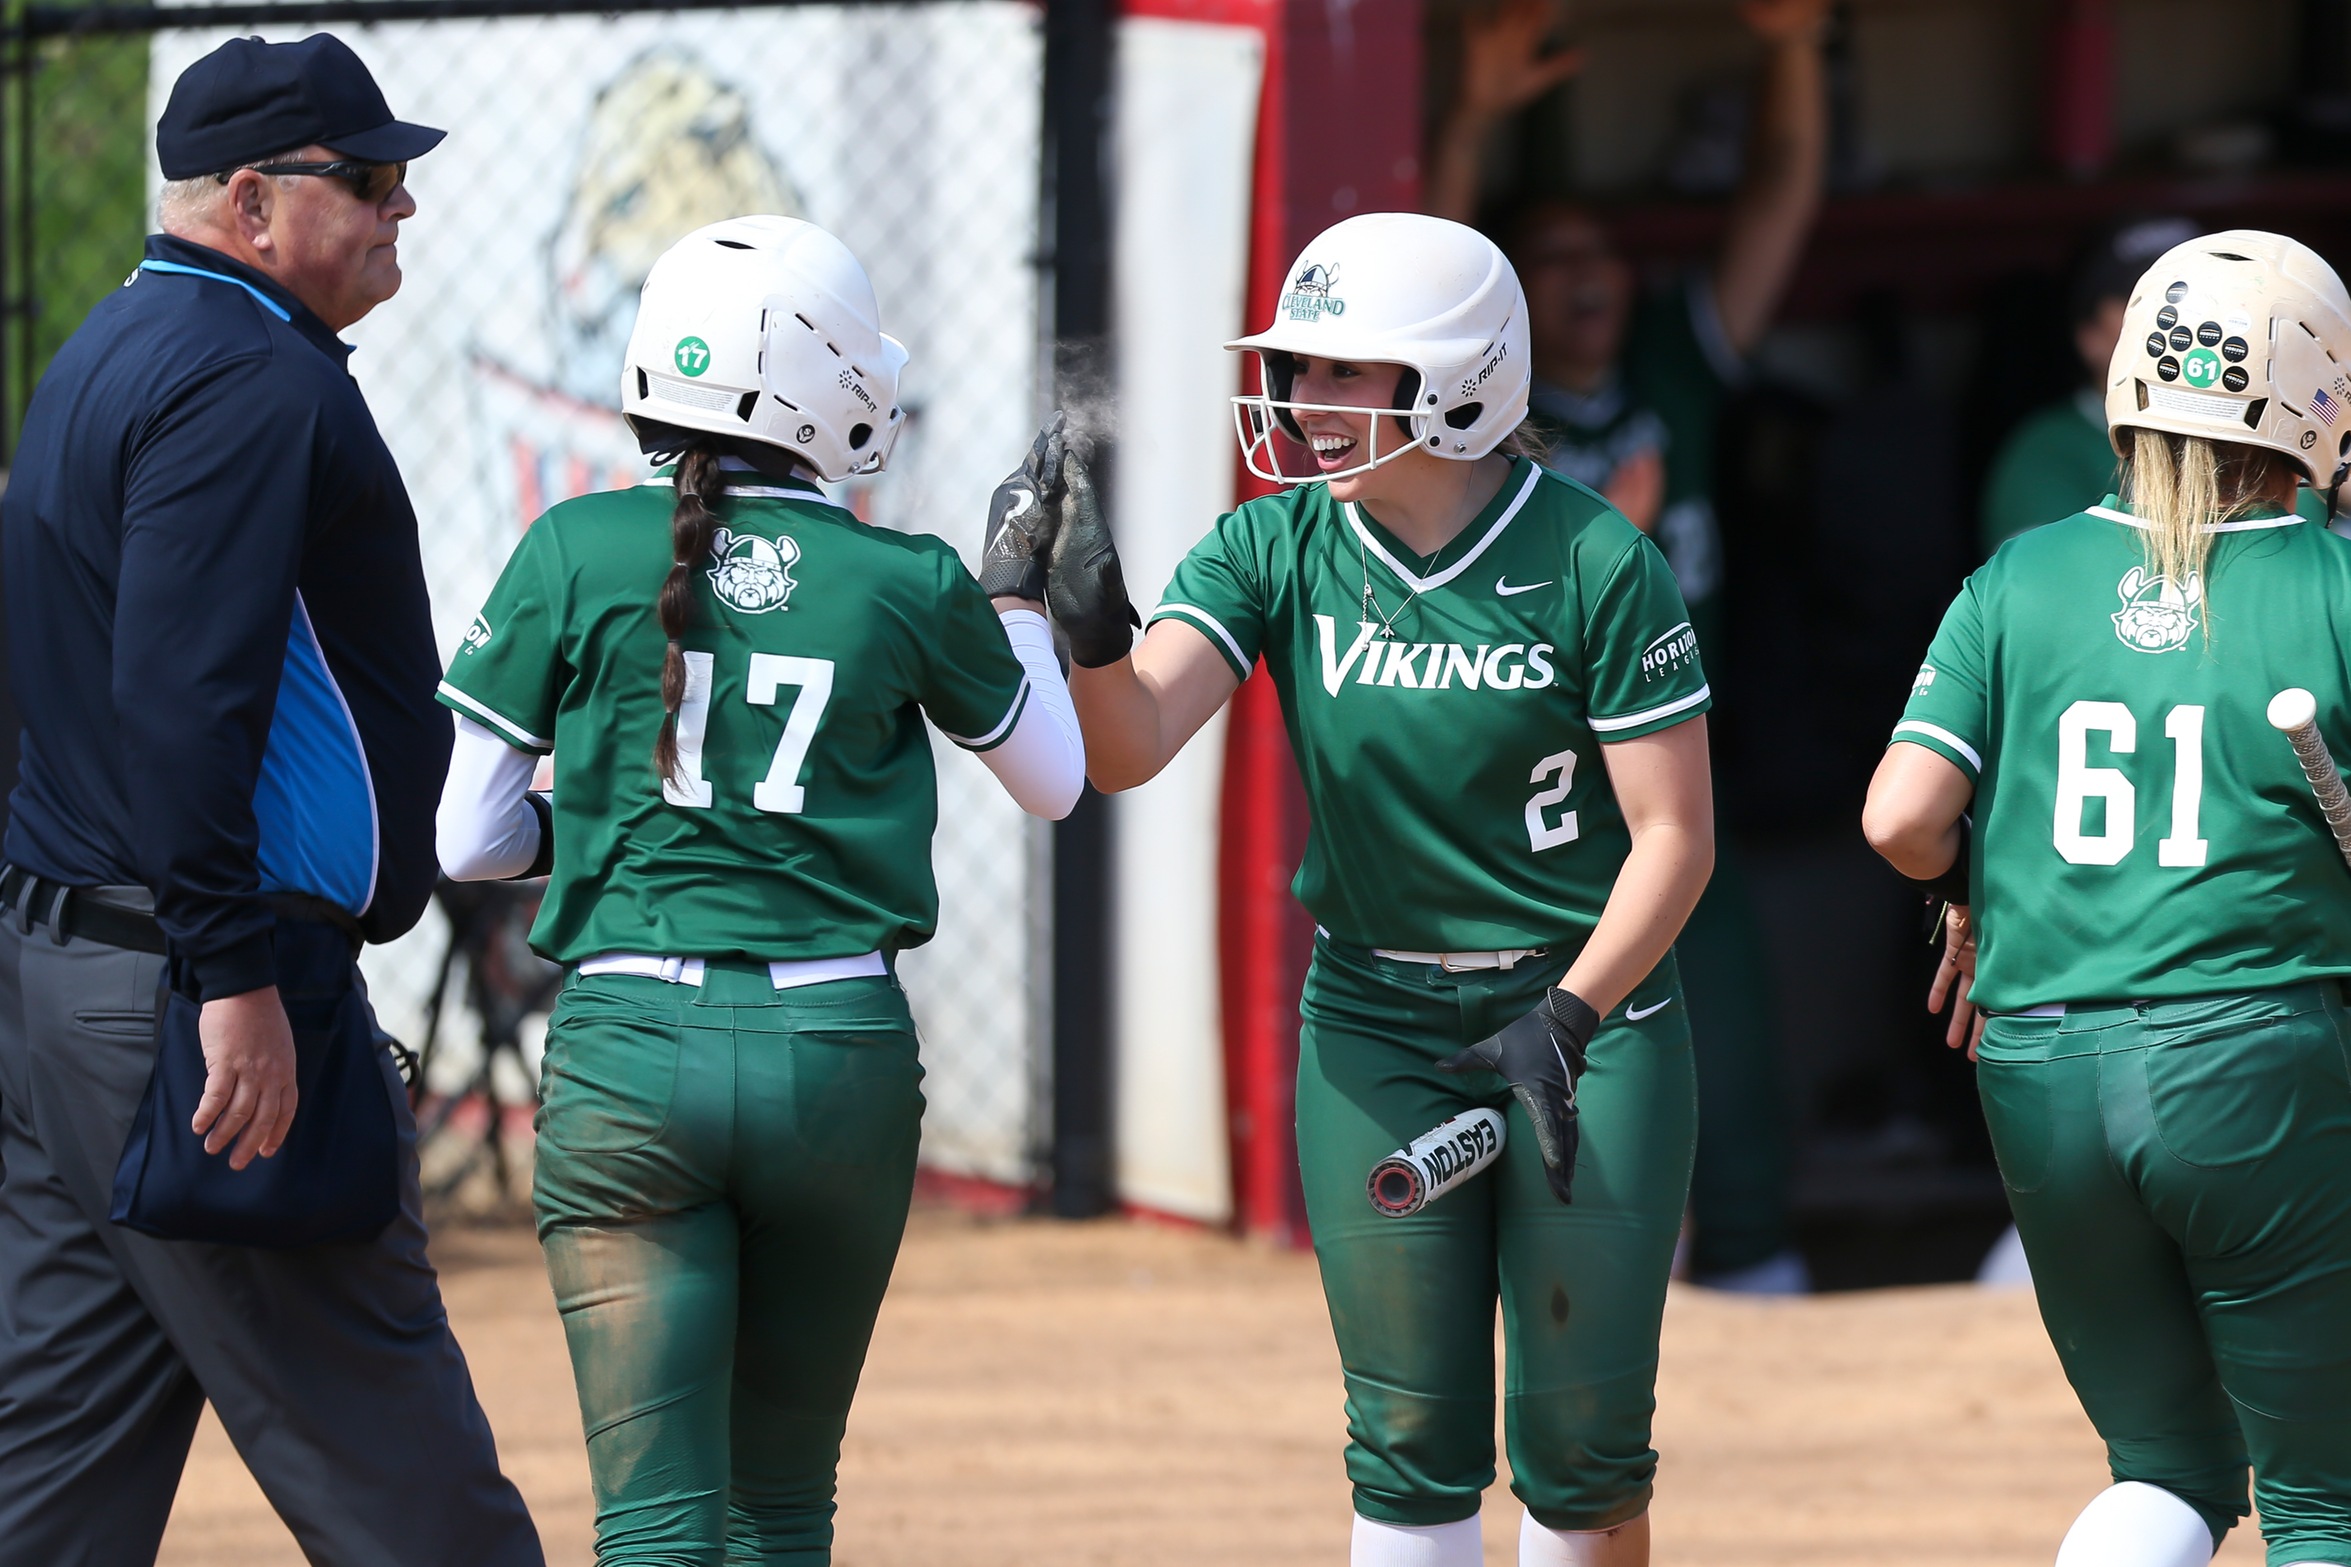 Cleveland State Softball Defeats Green Bay in Series Opener